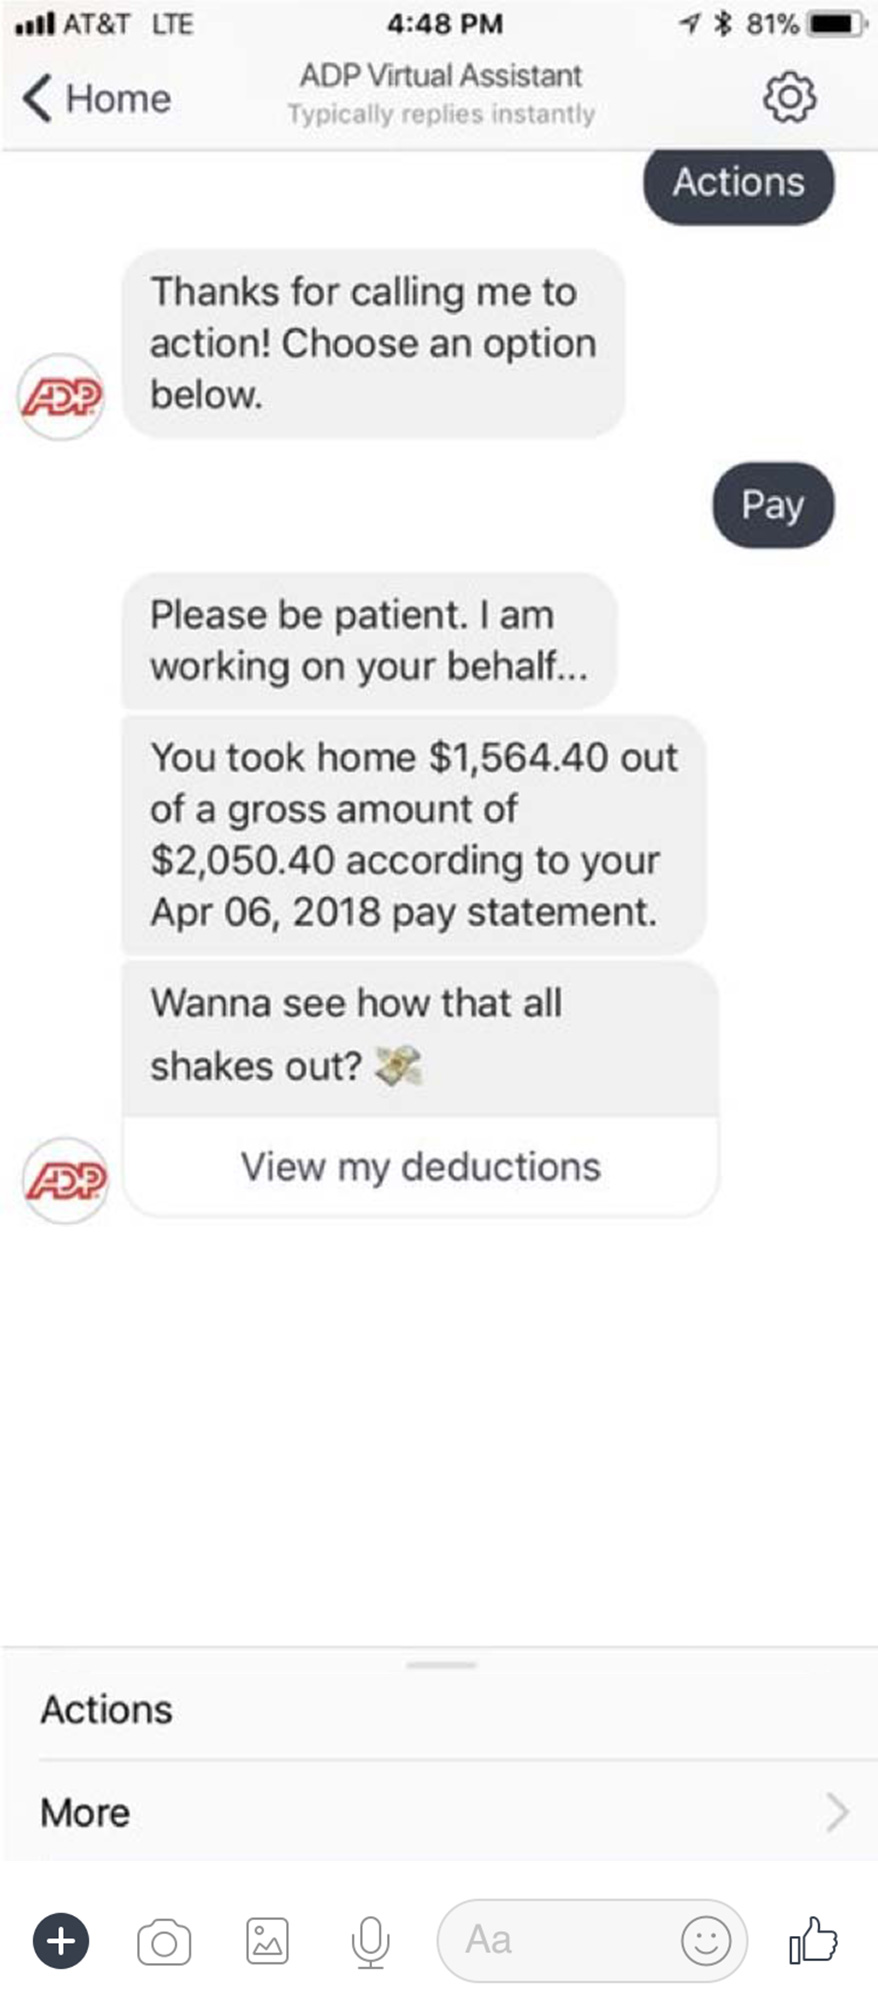 ADP bot providing a summary of an employee's latest pay statement, via the Workplace Chat mobile app.